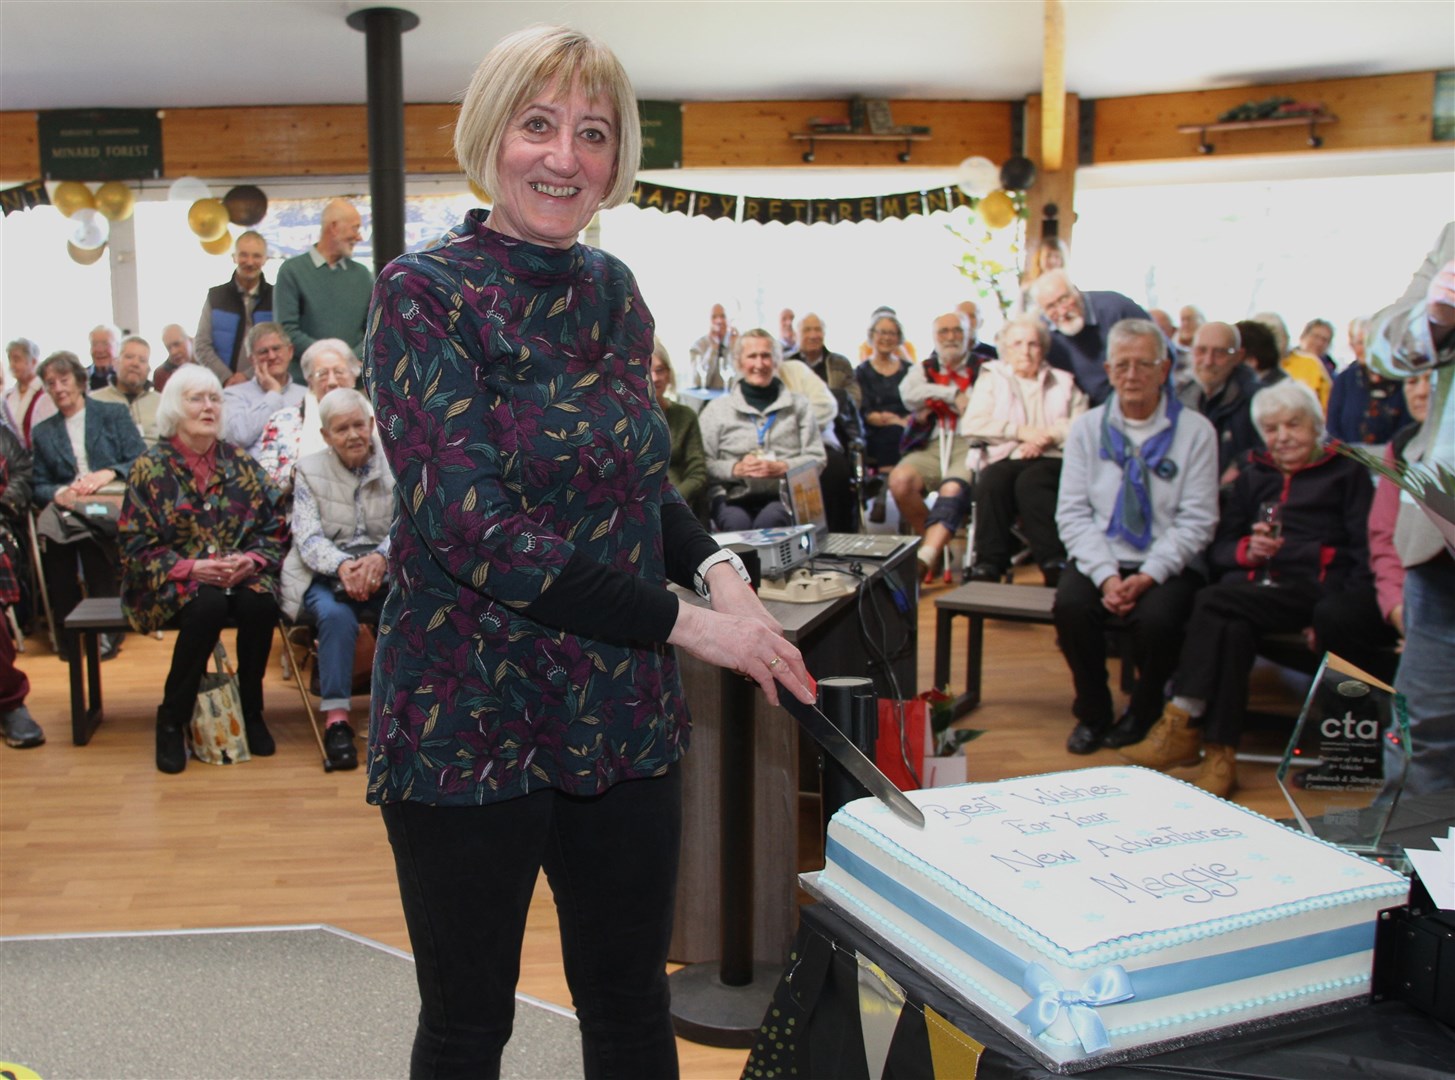 TAKING THE CAKE: She certainly did that with her years of service to the community in Badenoch and Strathspey, say friends and passengers.